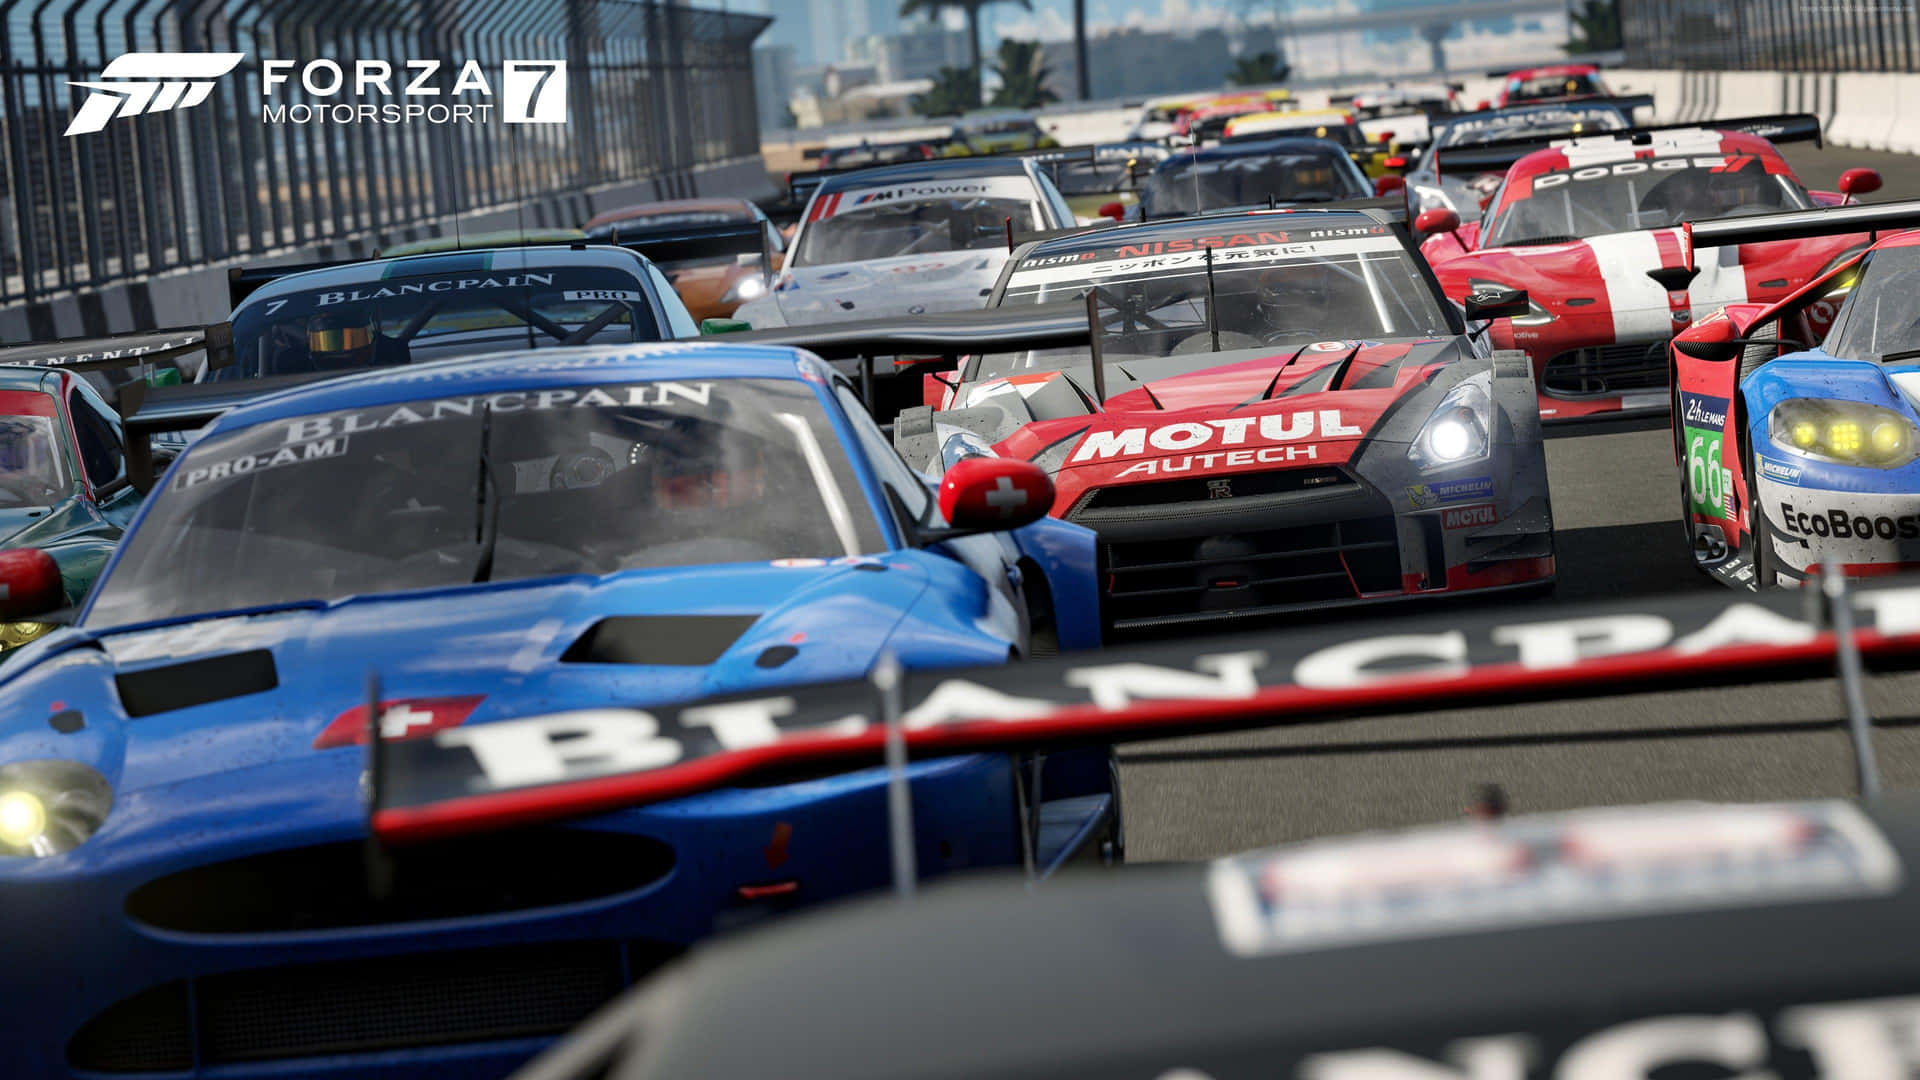 Experience the thrill of driving the world’s most prestigious race cars with Forza Motorsport 7. Wallpaper